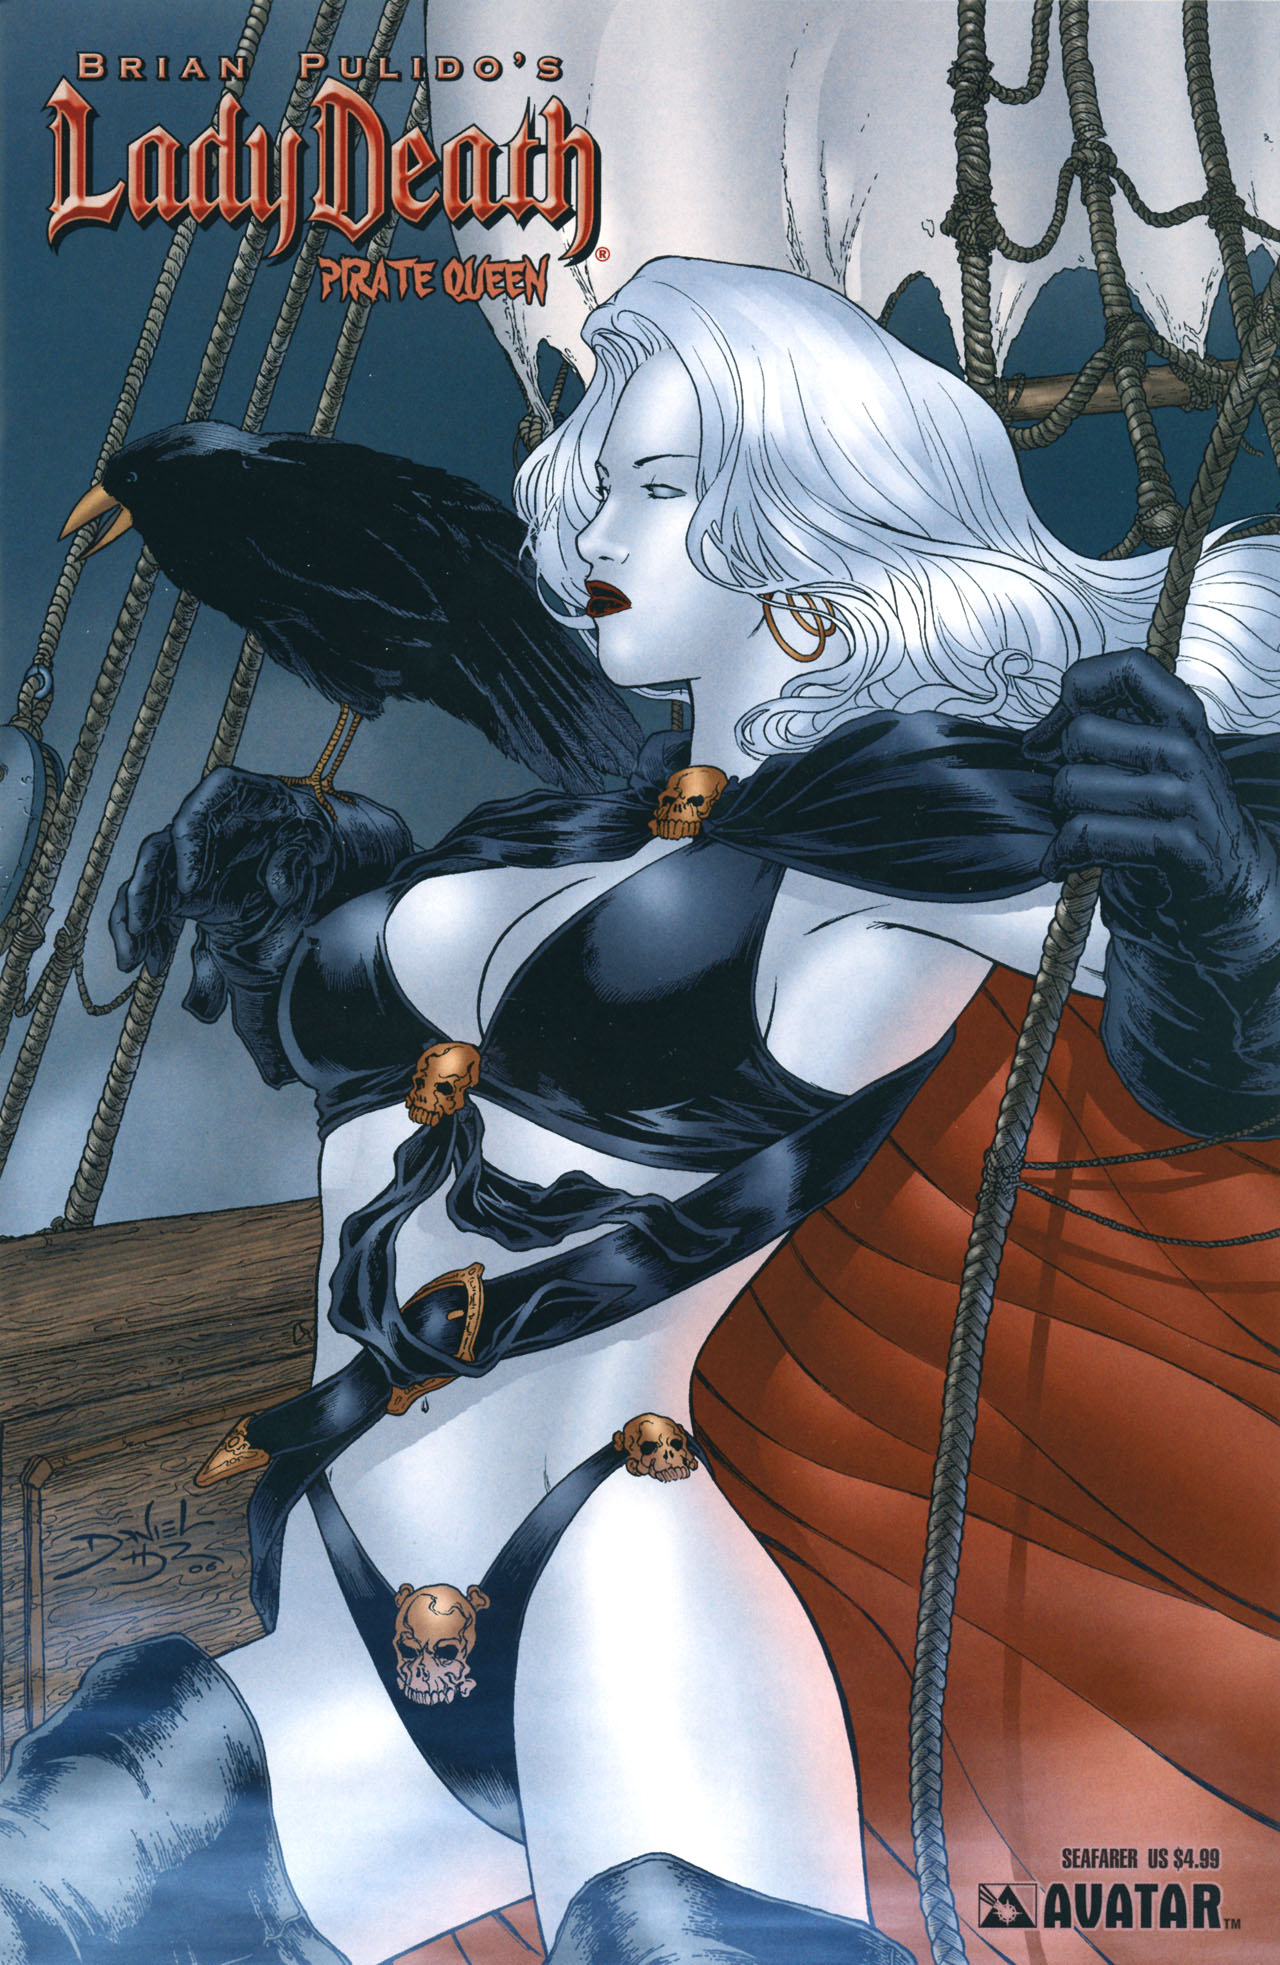 Read online Lady Death Pirate Queen comic -  Issue # Full - 3